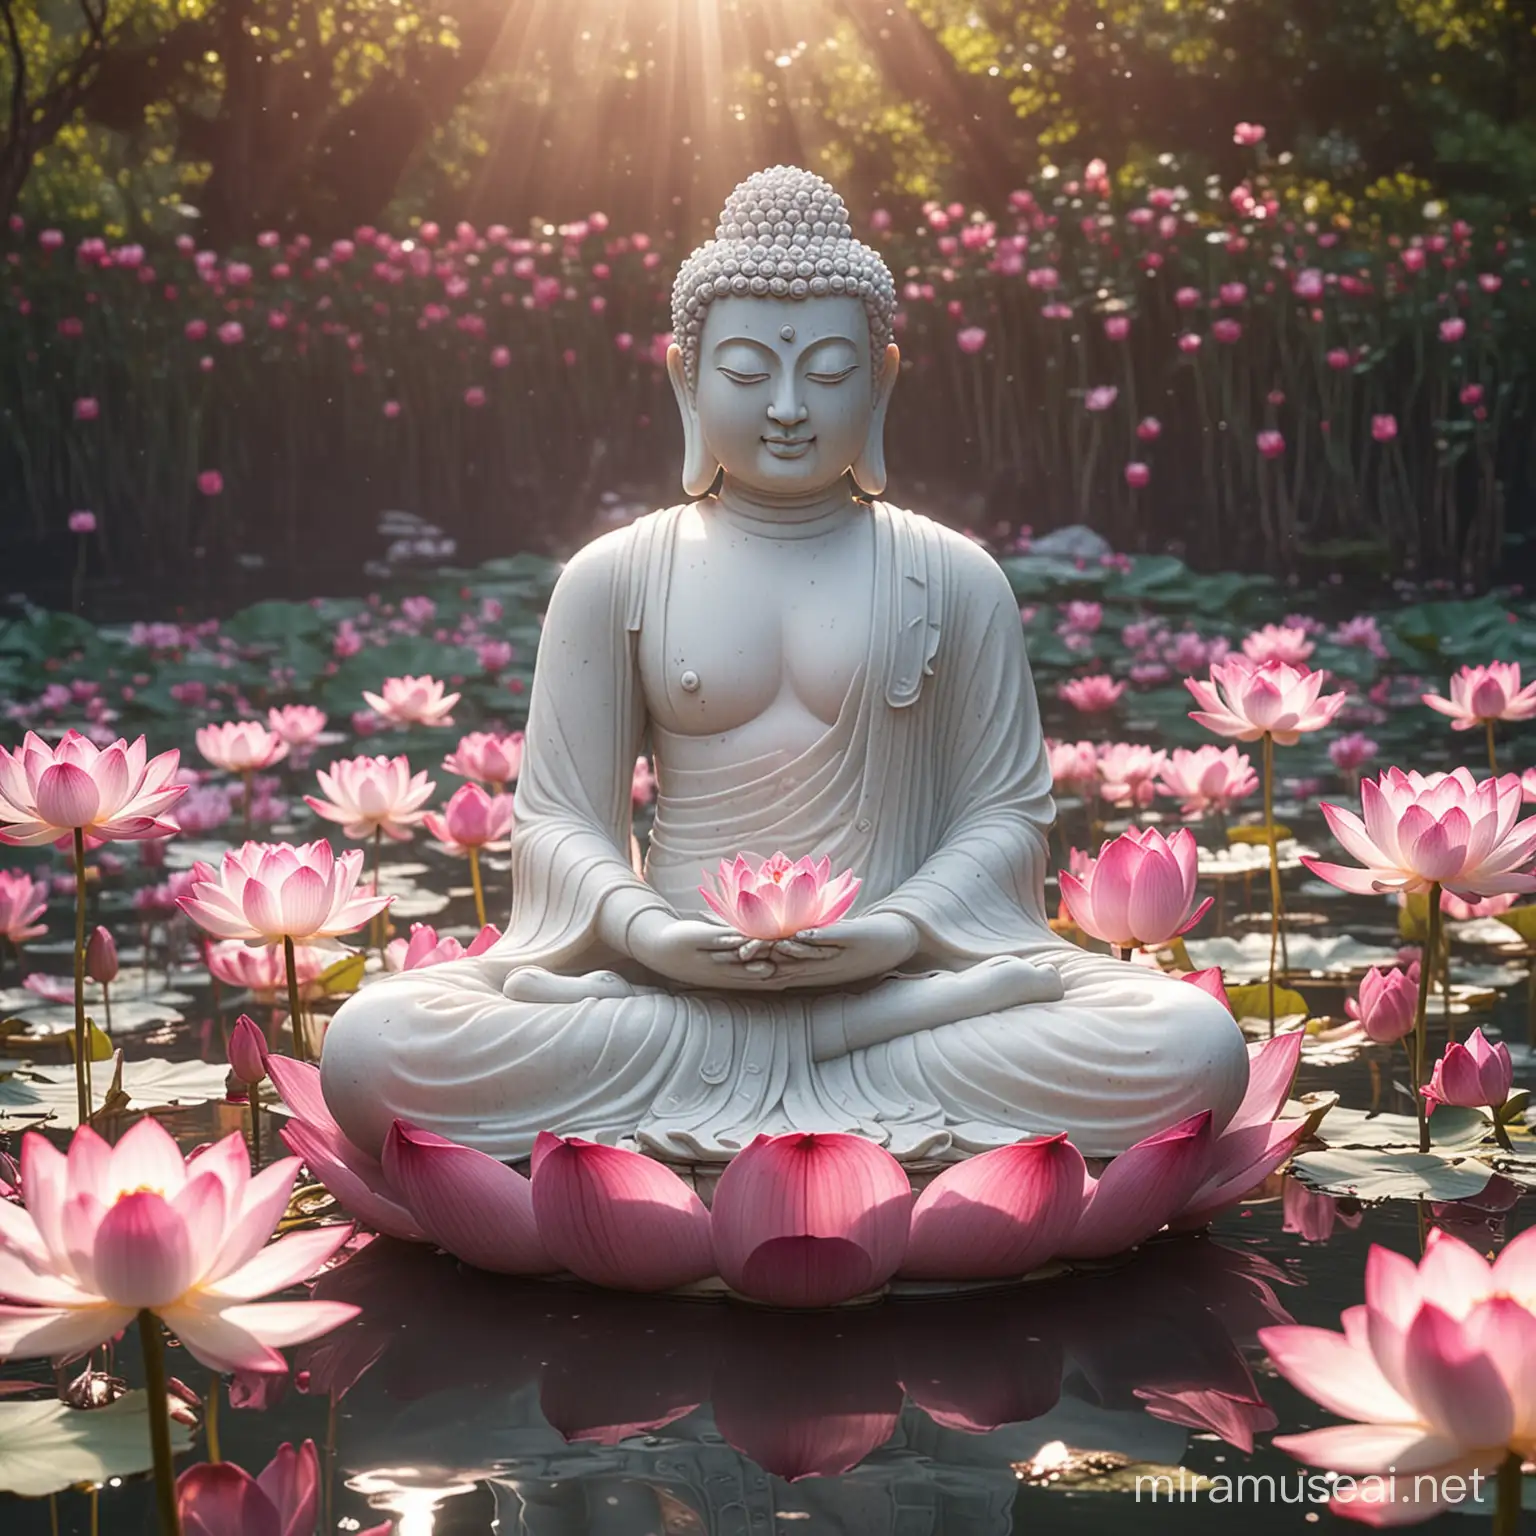 A beautiful white marble Buddha in the posture of concentration sits in a pool of pink lotus flowers. Fantasy lighting, 2K images